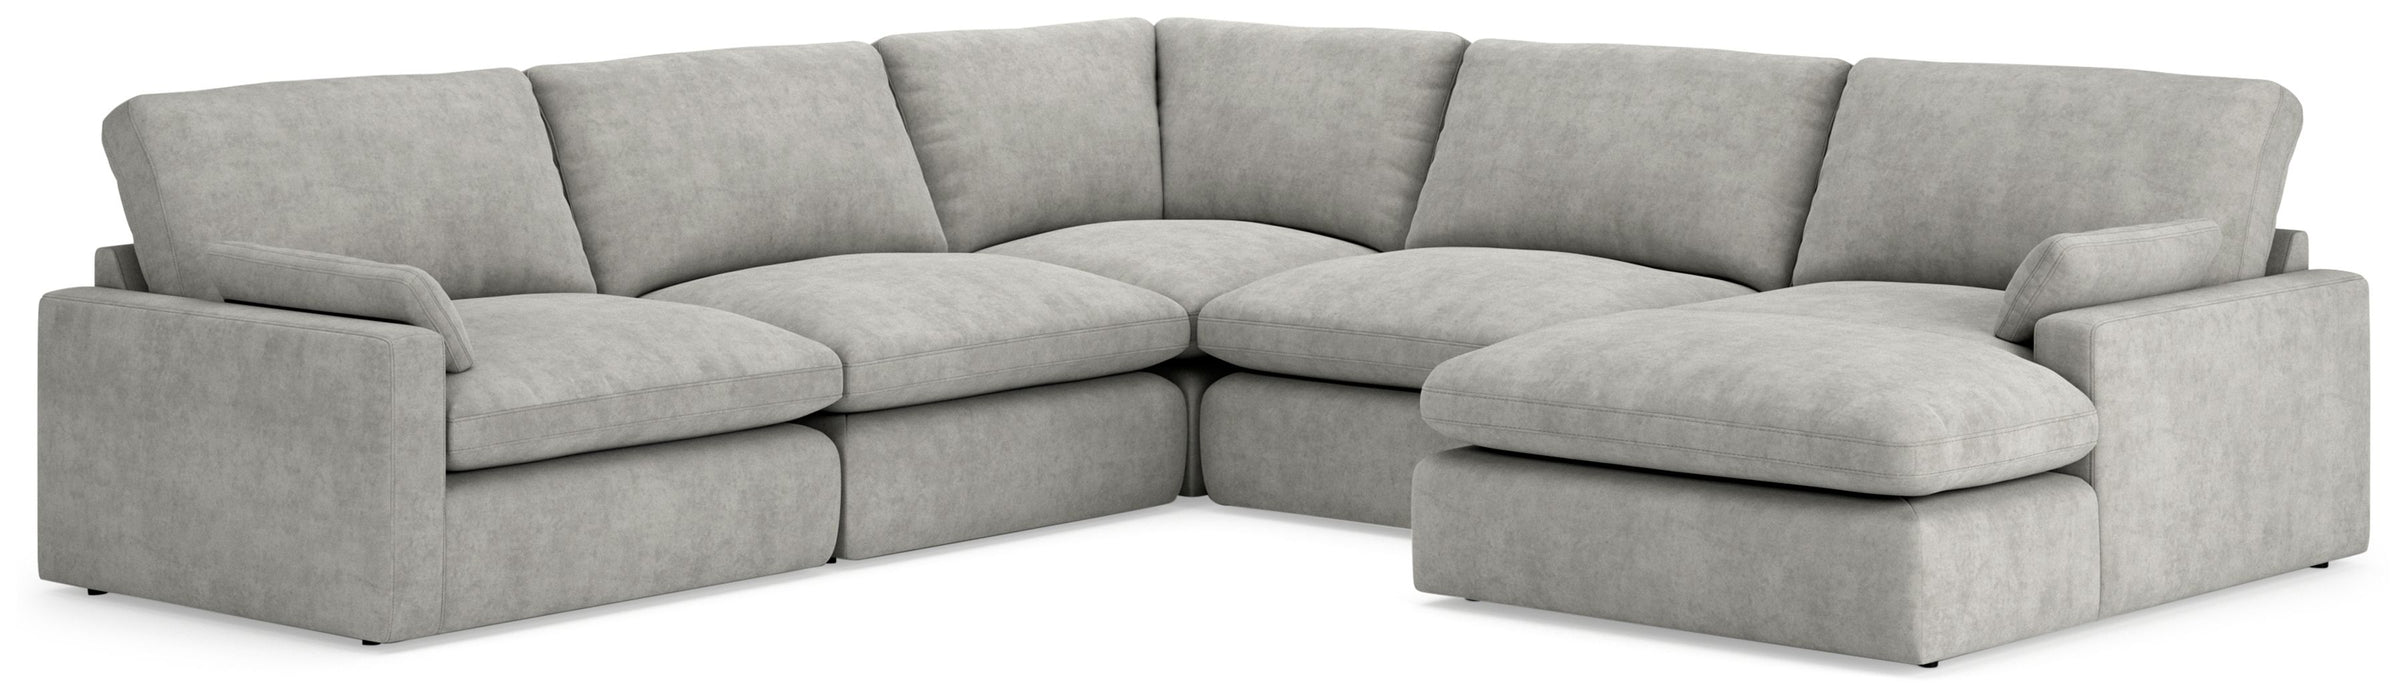 Sophie - Gray - 5-Piece Sectional With Raf Corner Chaise